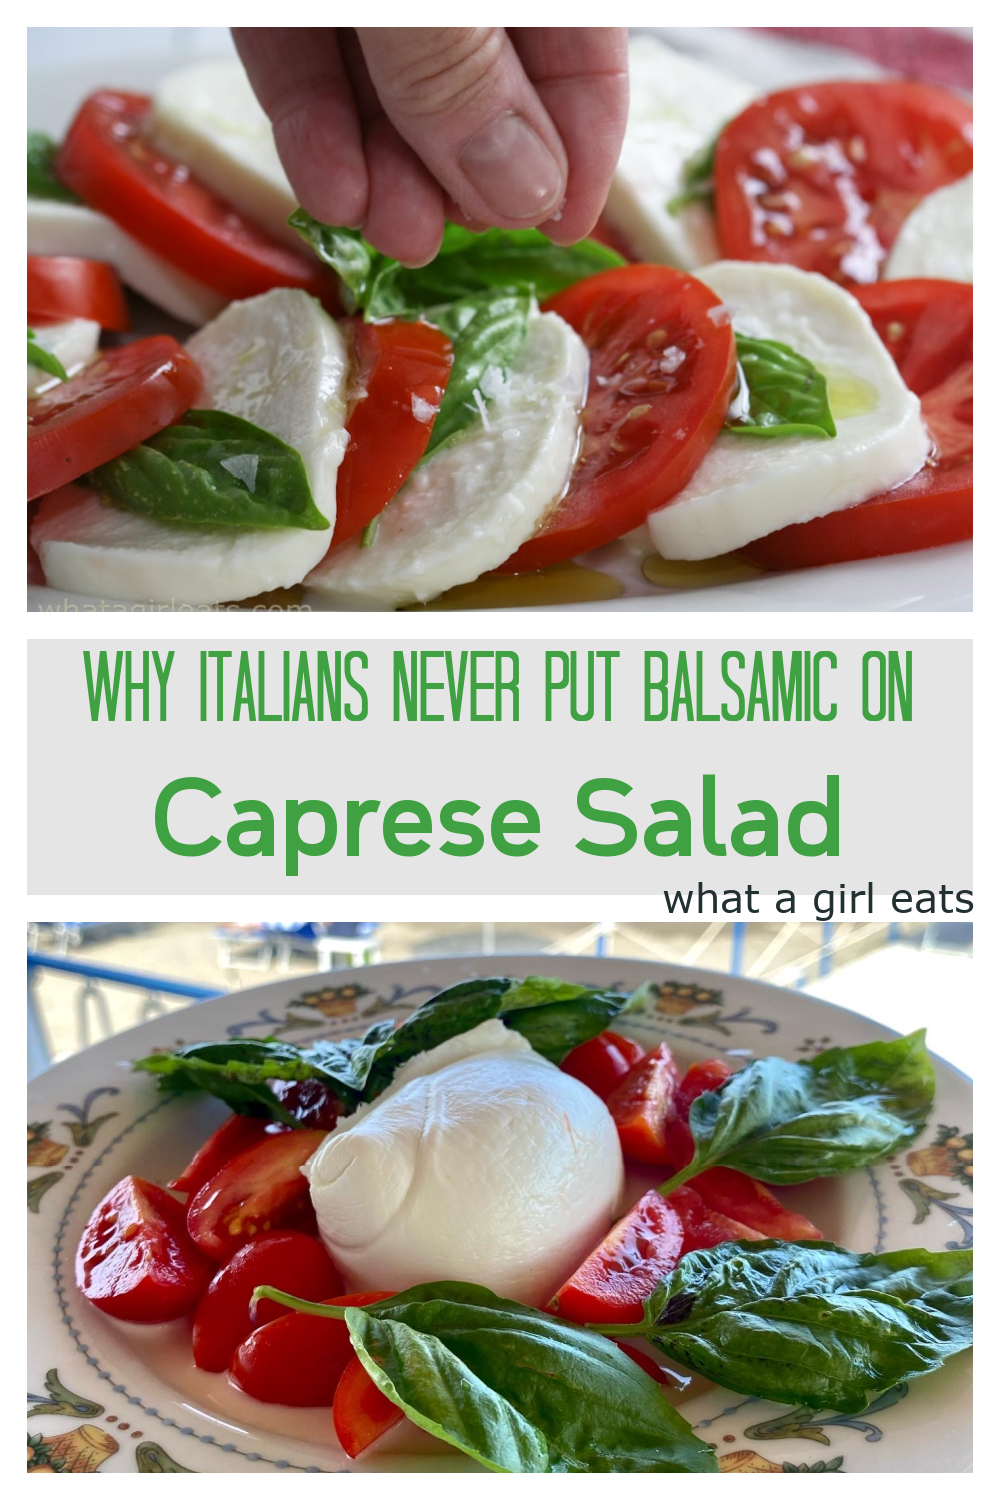 Caprese is a fancy word for tomato, mozzarella, and basil salad. The flavors of the ingredients with a drizzle of olive oil and a sprinkle of sea salt are a perfect blend of flavors. Read why you should skip the Balsamic on a Caprese salad.